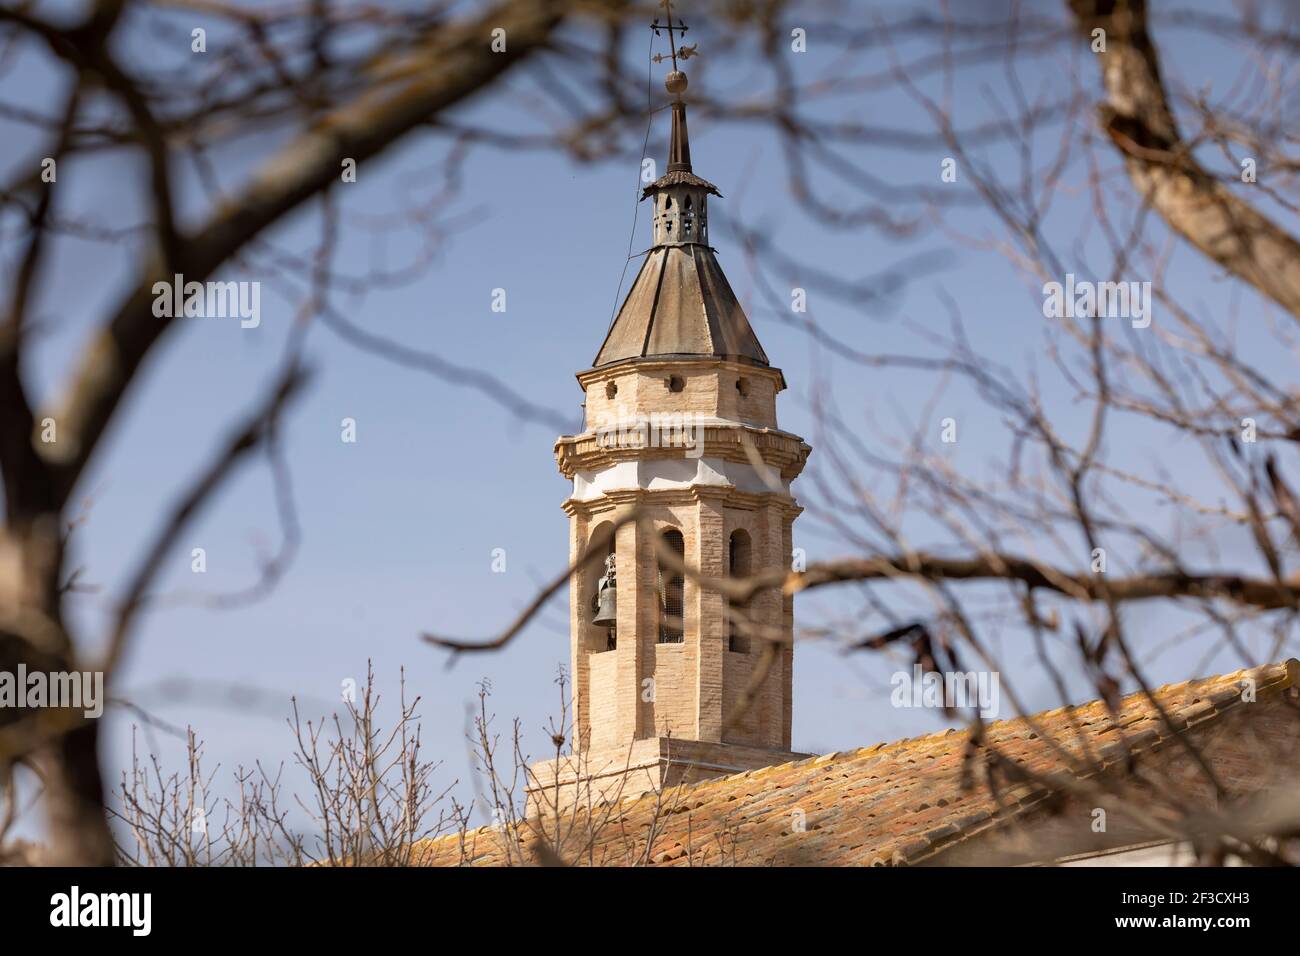 Photograph of the bell tower of the church of Santa Maria, of late Gothic architectural style, in the small town of Bulbuente, in the Campo de Borja r Stock Photo